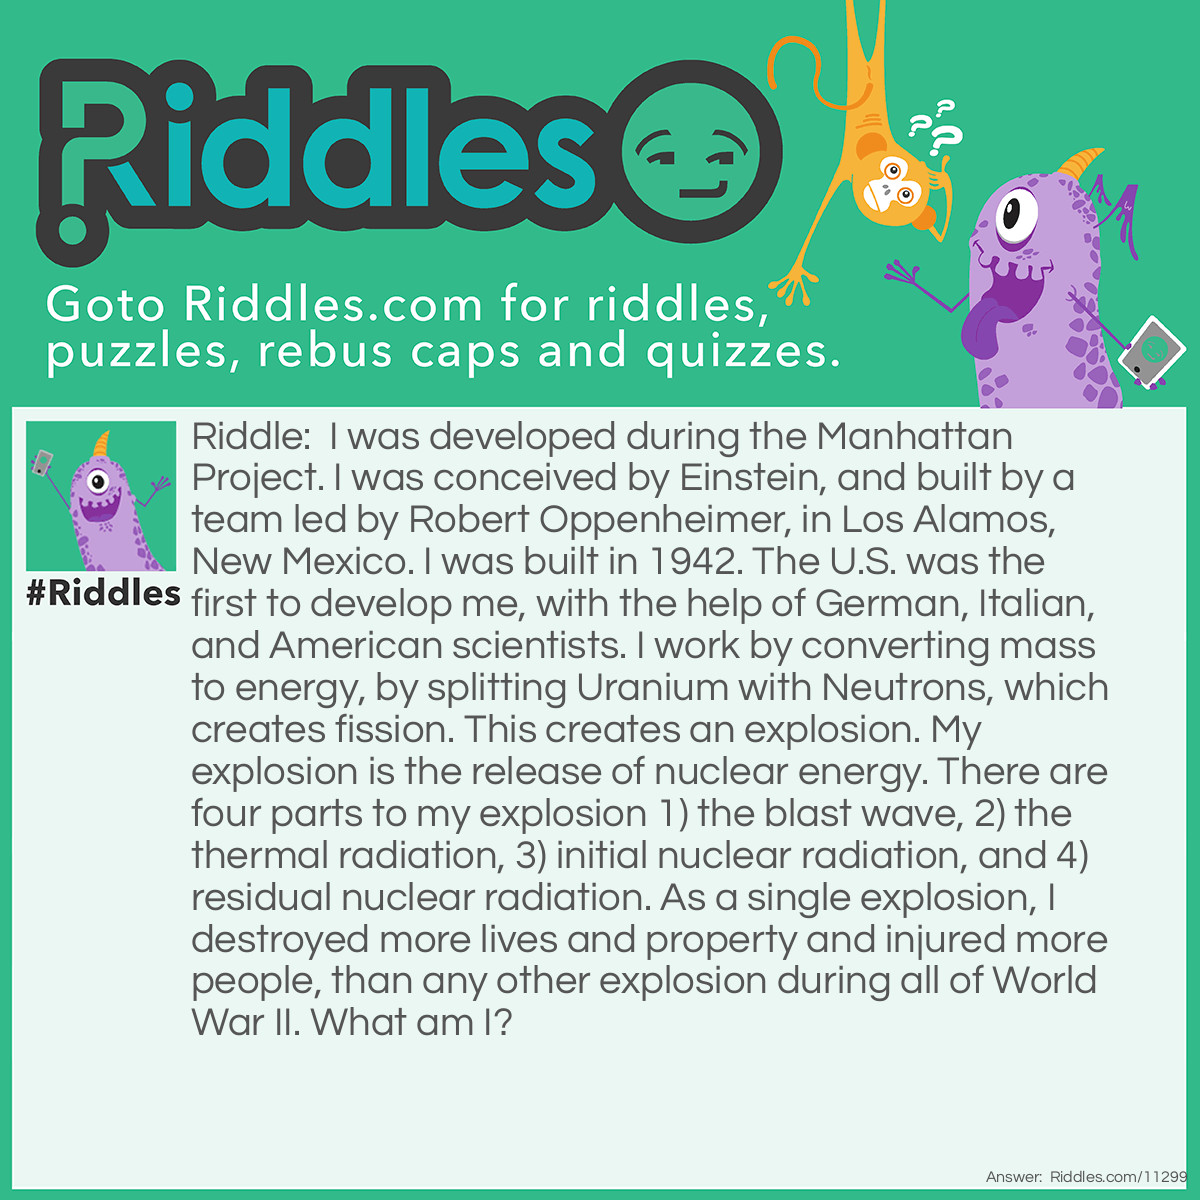 Riddle: I was developed during the Manhattan Project. I was conceived by Einstein, and built by a team led by Robert Oppenheimer, in Los Alamos, New Mexico. I was built in 1942. The U.S. was the first to develop me, with the help of German, Italian, and American scientists. I work by converting mass to energy, by splitting Uranium with Neutrons, which creates fission. This creates an explosion. My explosion is the release of nuclear energy. There are four parts to my explosion 1) the blast wave, 2) the thermal radiation, 3) initial nuclear radiation, and 4) residual nuclear radiation. As a single explosion, I destroyed more lives and property and injured more people, than any other explosion during all of World War II. What am I? Answer: I Am The Atomic Bomb.